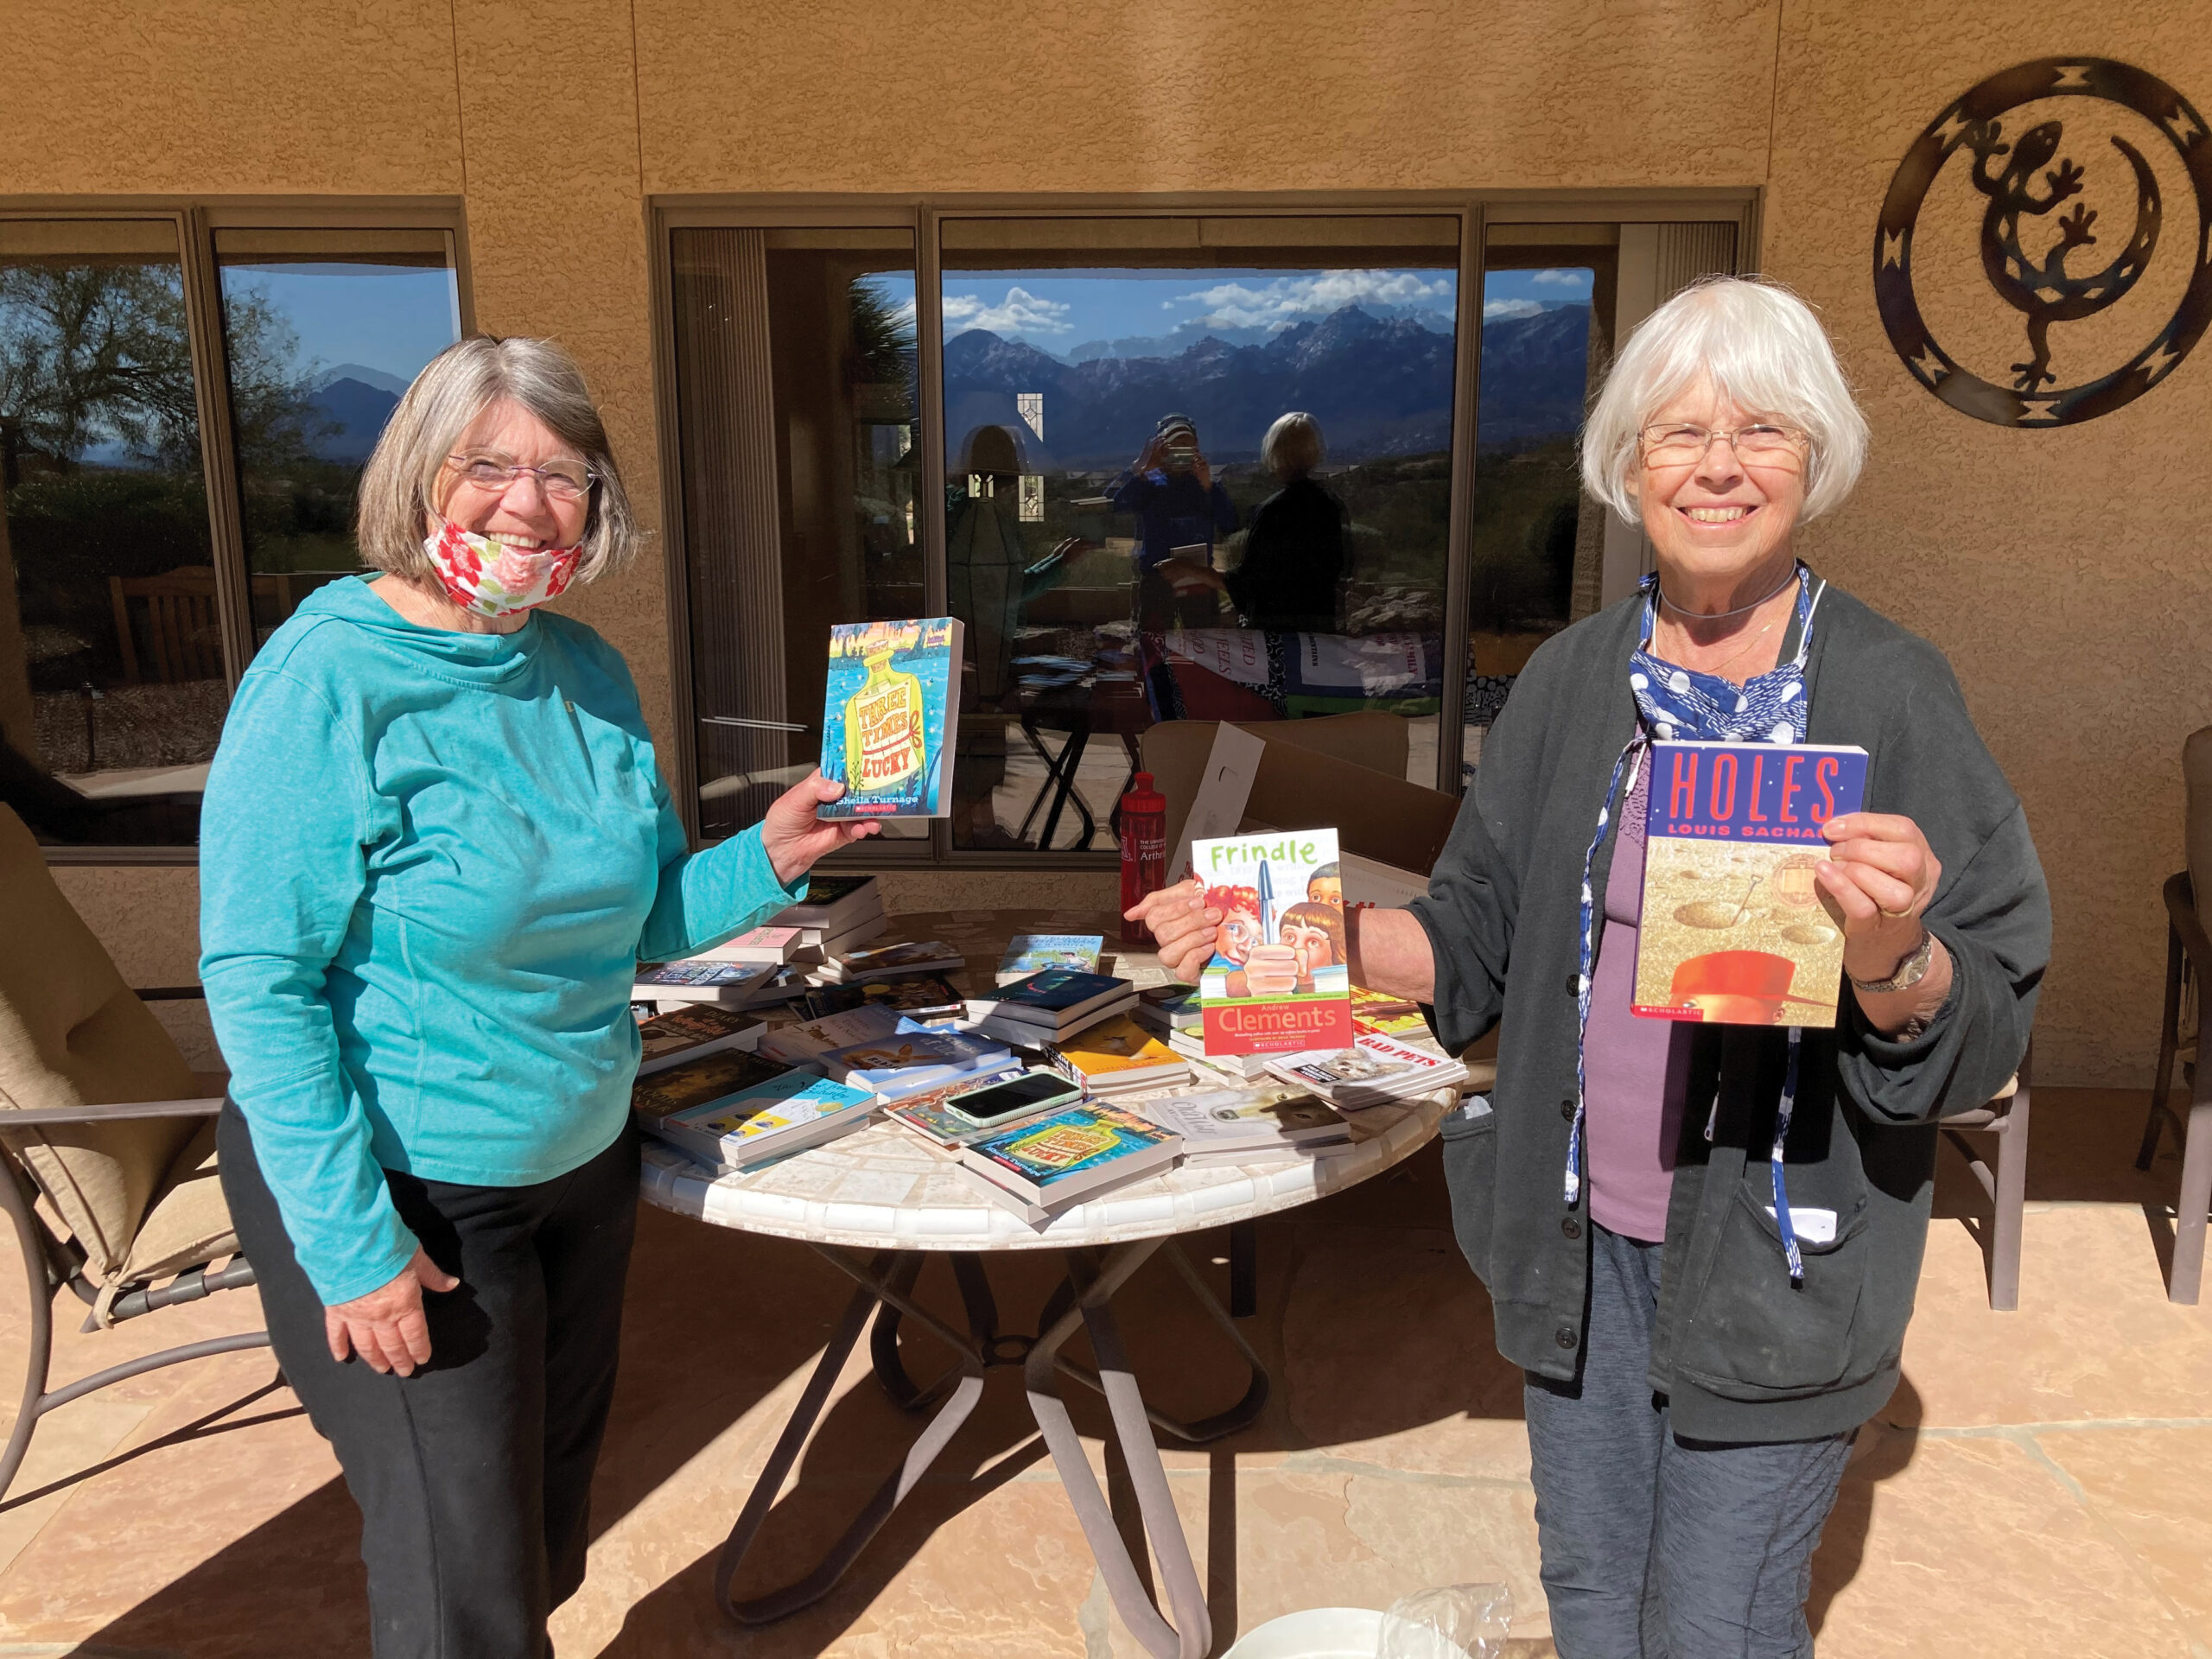 Patty See and Mary Thompson prepare books for teachers’ classroom libraries.